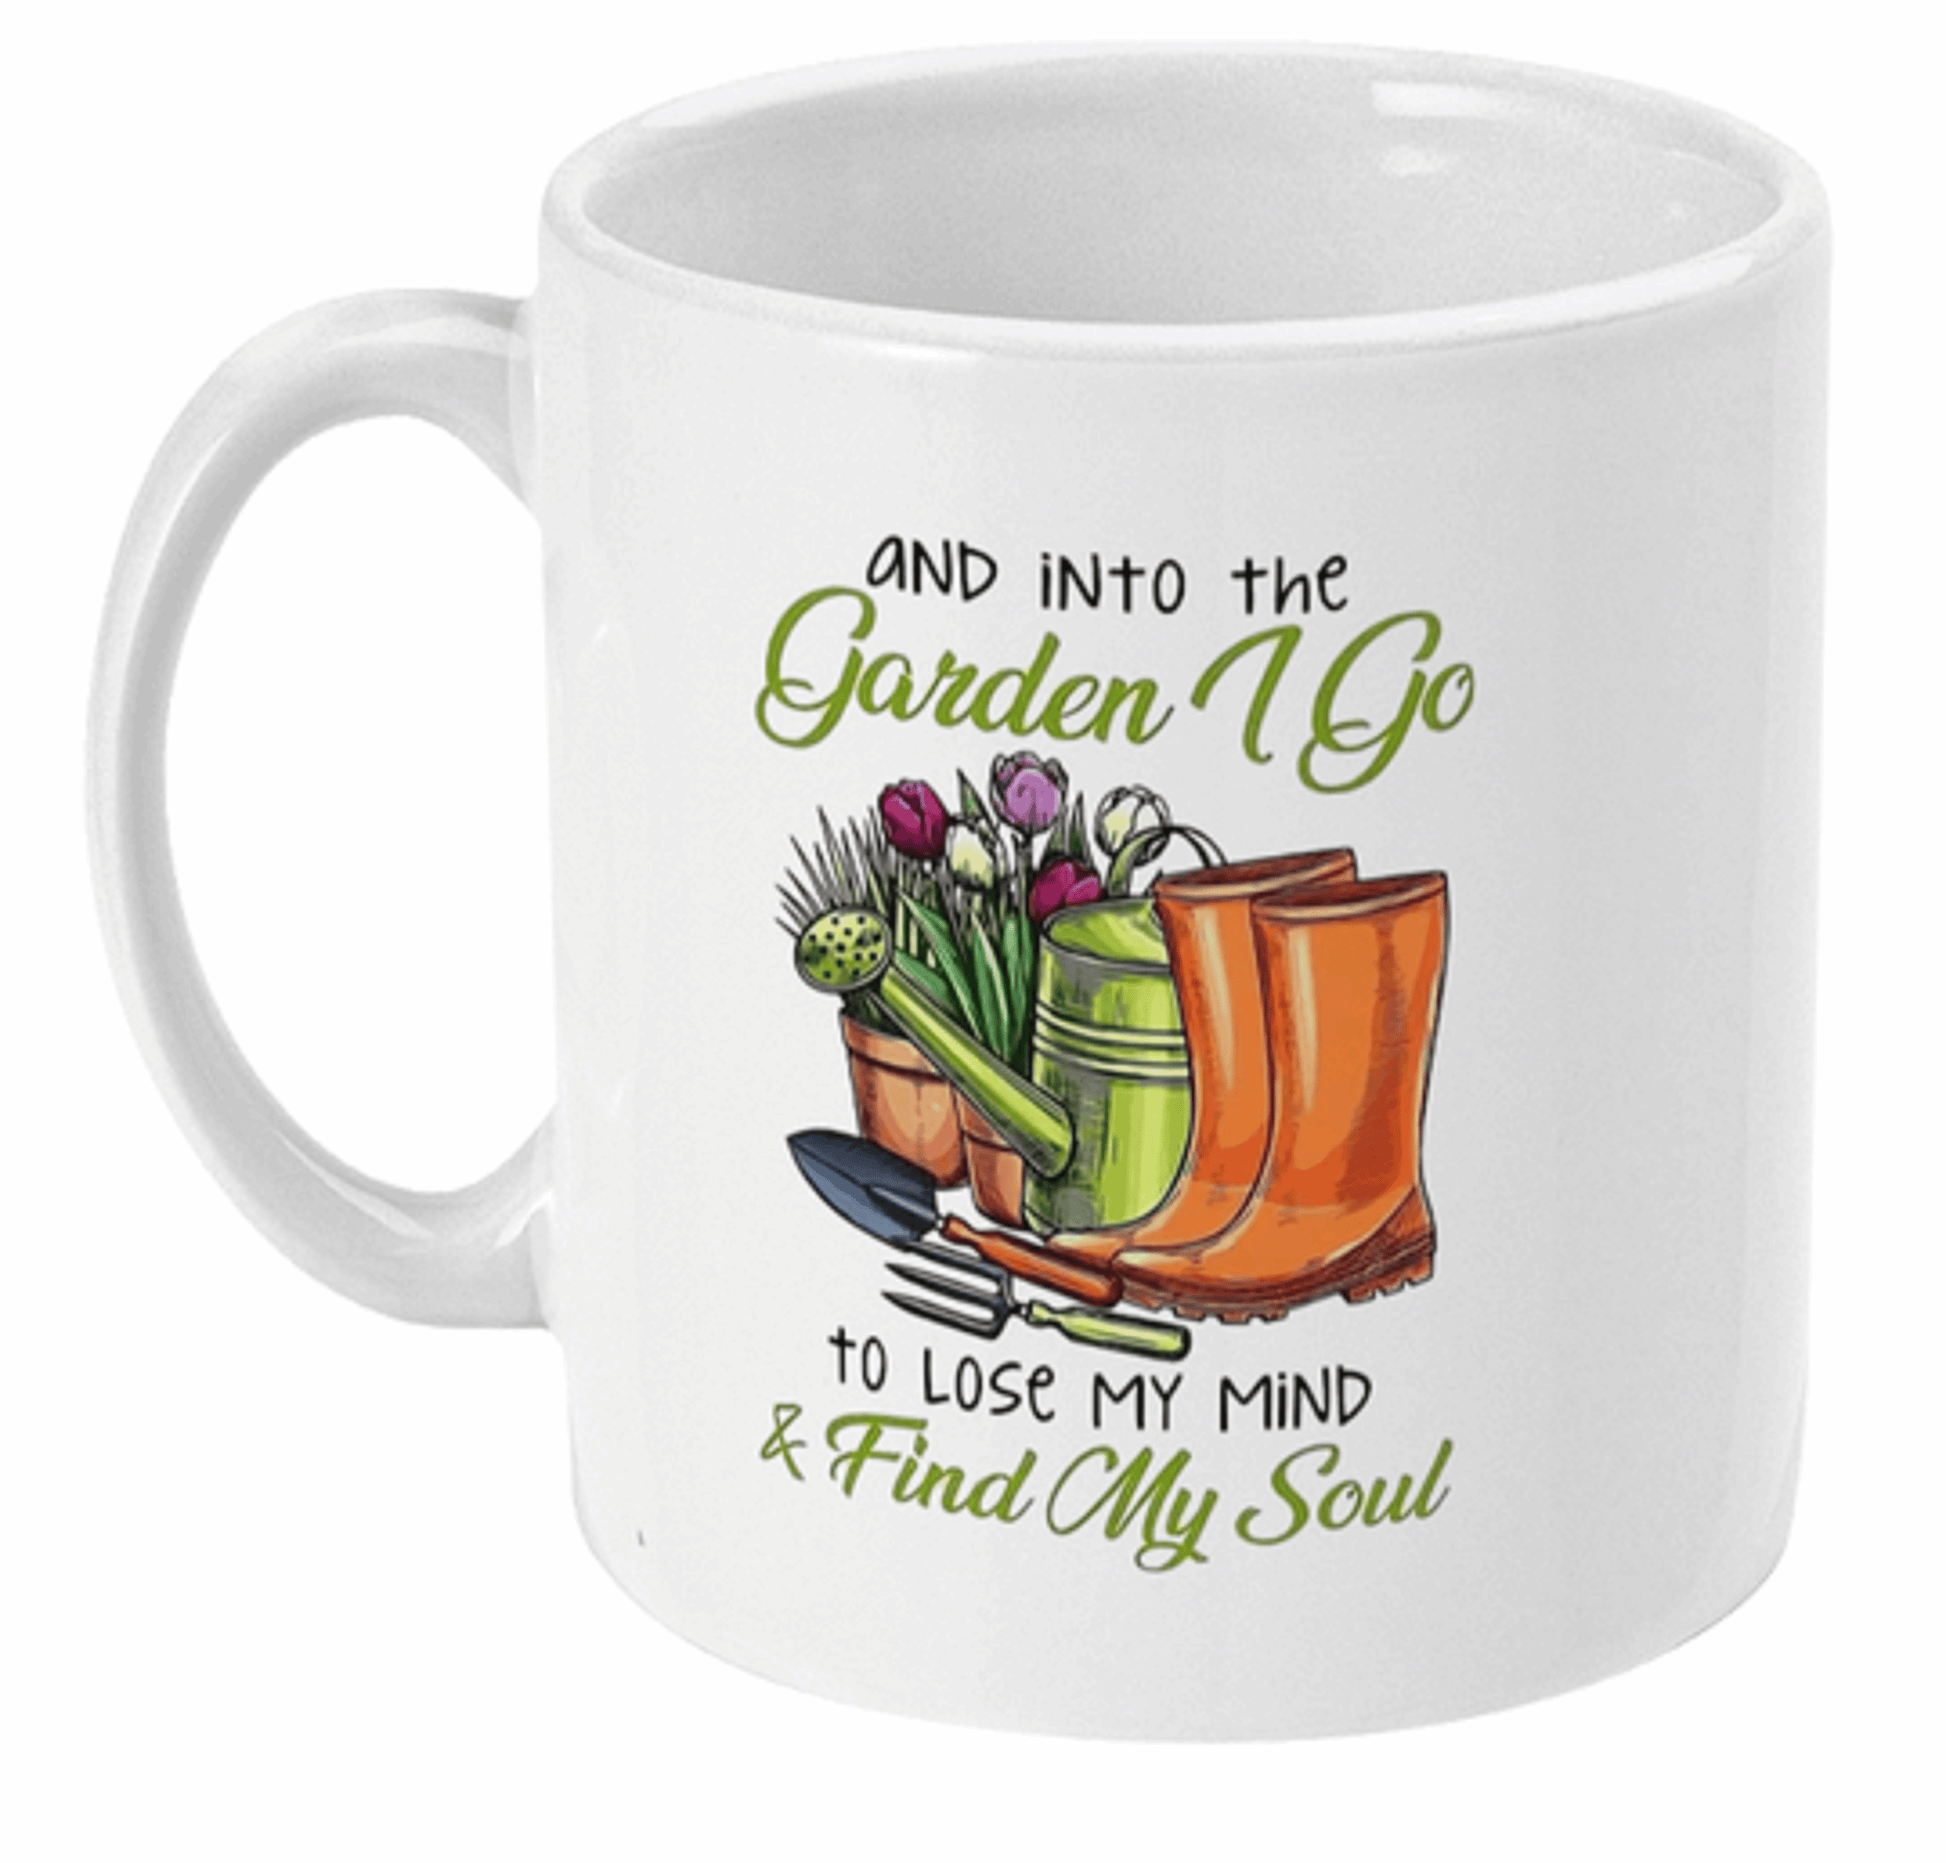  Into The Garden I Go To Lose My Mind And Find My Soul Mug by Free Spirit Accessories sold by Free Spirit Accessories